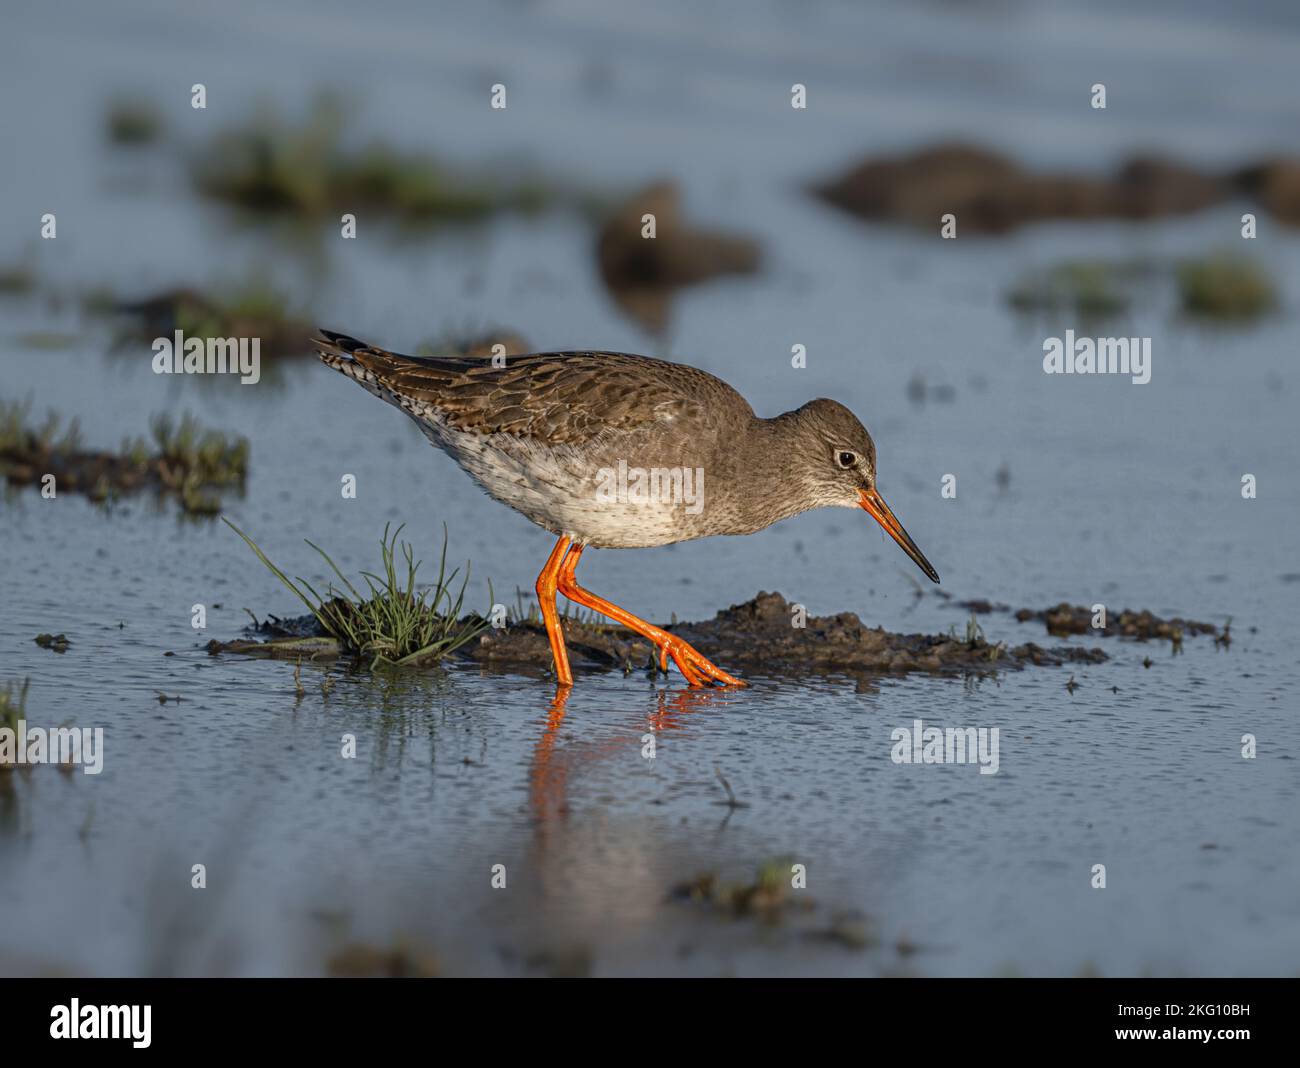 Common Redshank(Tringa totanus) searcing for food items on a shallow marshy pool at Cley in North Norfolk, UK Stock Photo